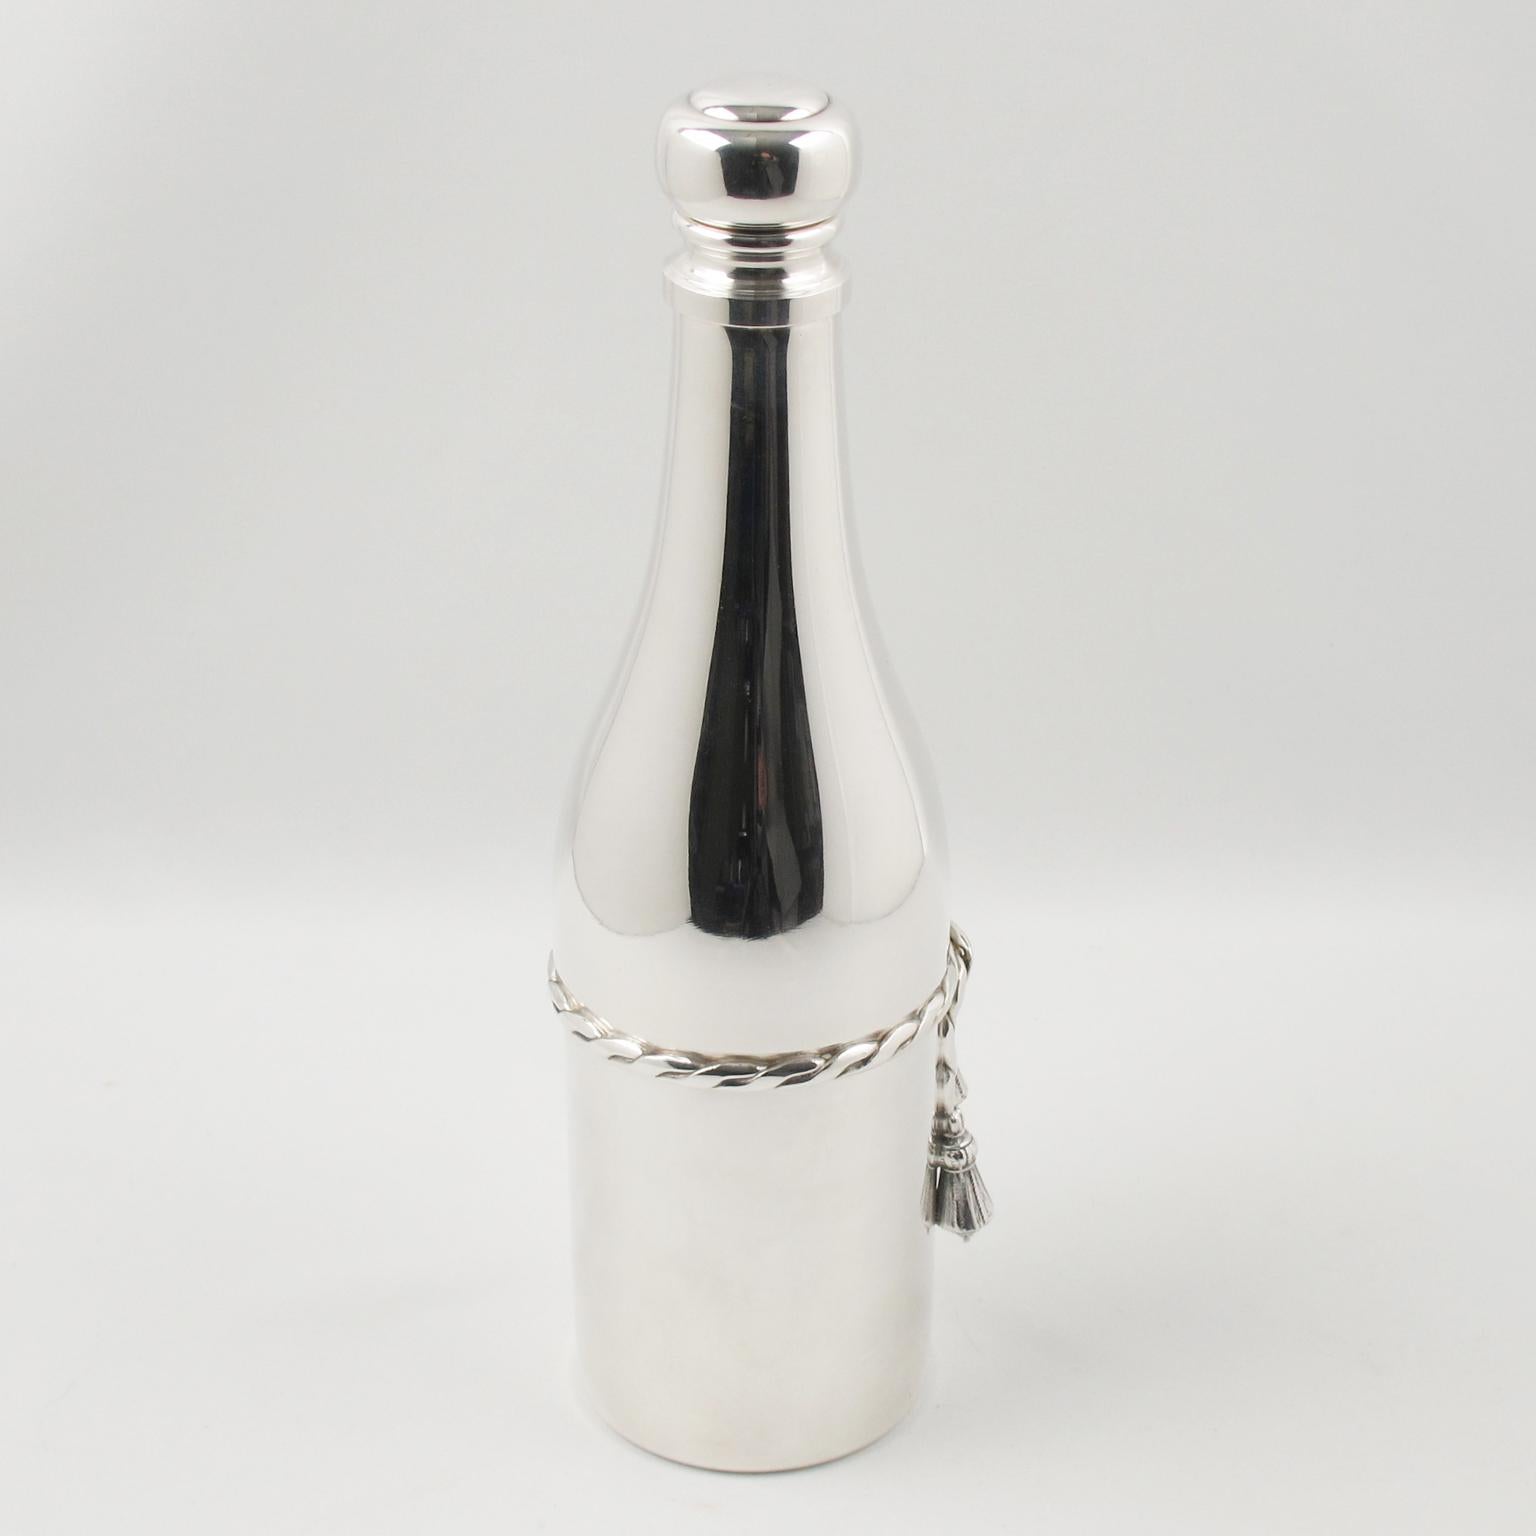 French Maria Pergay Style Silver Plate Barware Champagne Bottle Cocktail Martini Shaker